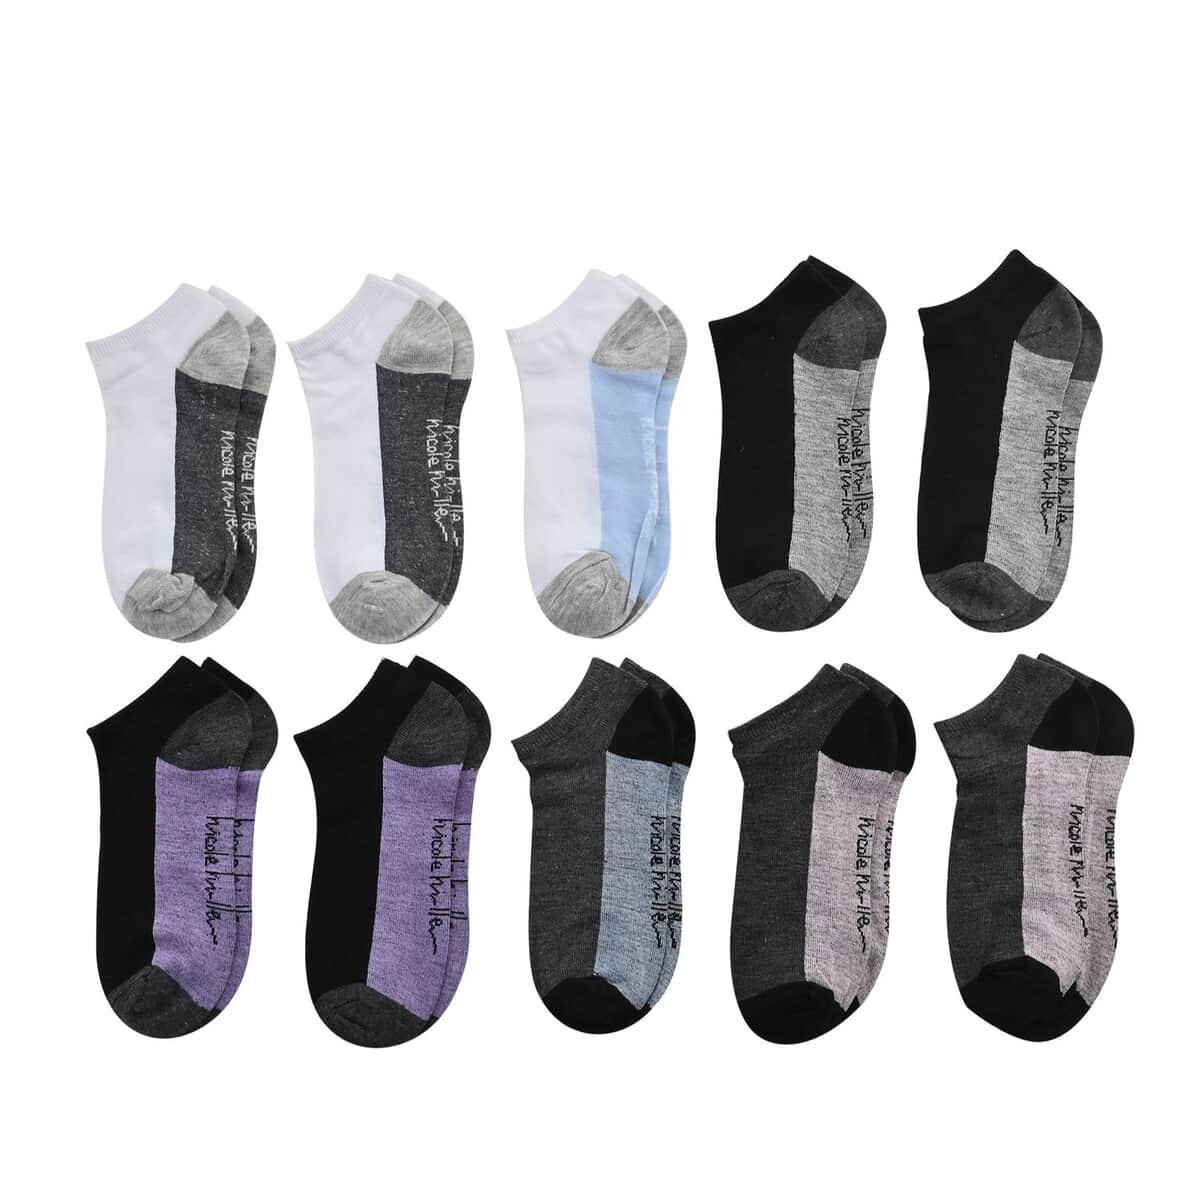 Nicole Miller 10 Pairs No Show Socks (Sizes 4-10) - White/Gray image number 0